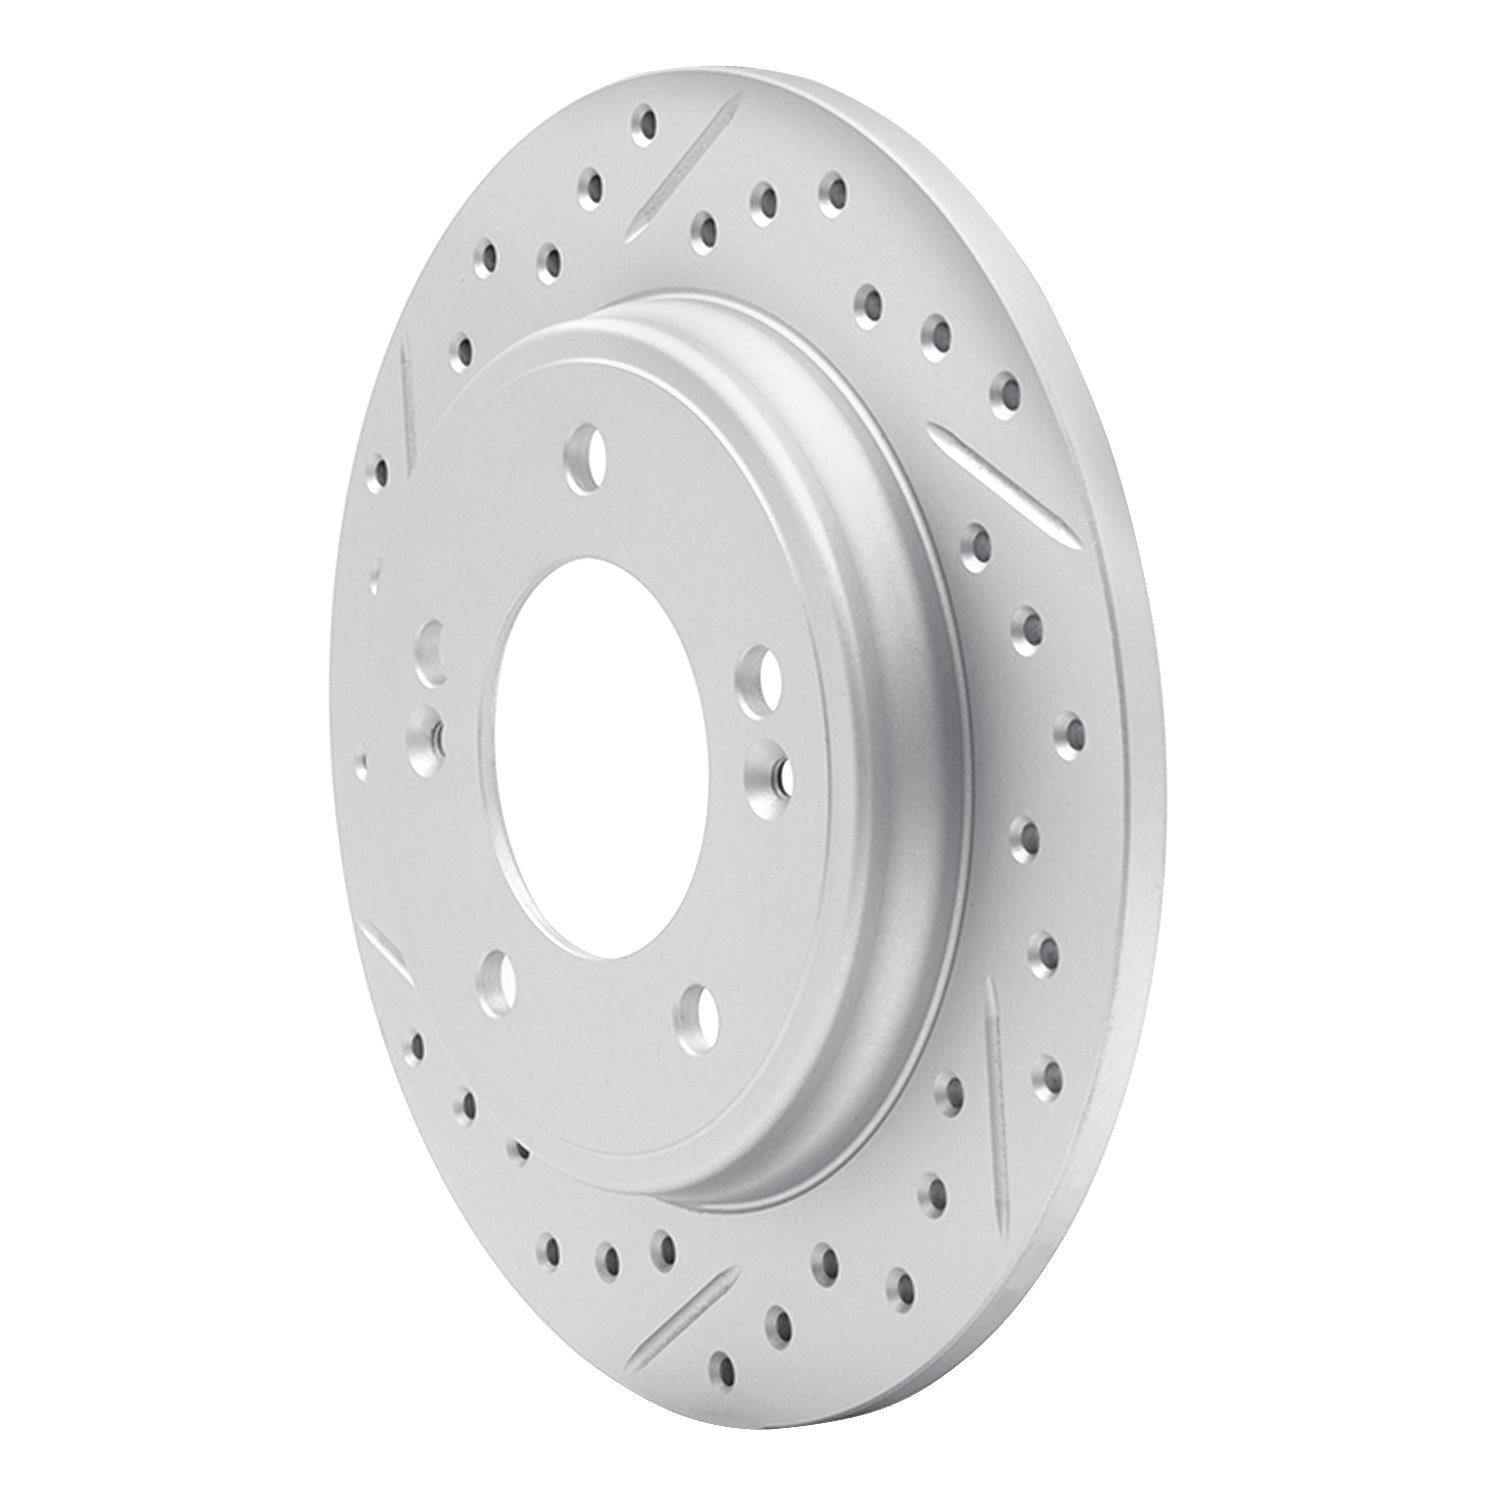 830-21034L Geoperformance Drilled/Slotted Brake Rotor, Fits Select Kia/Hyundai/Genesis, Position: Rear Left